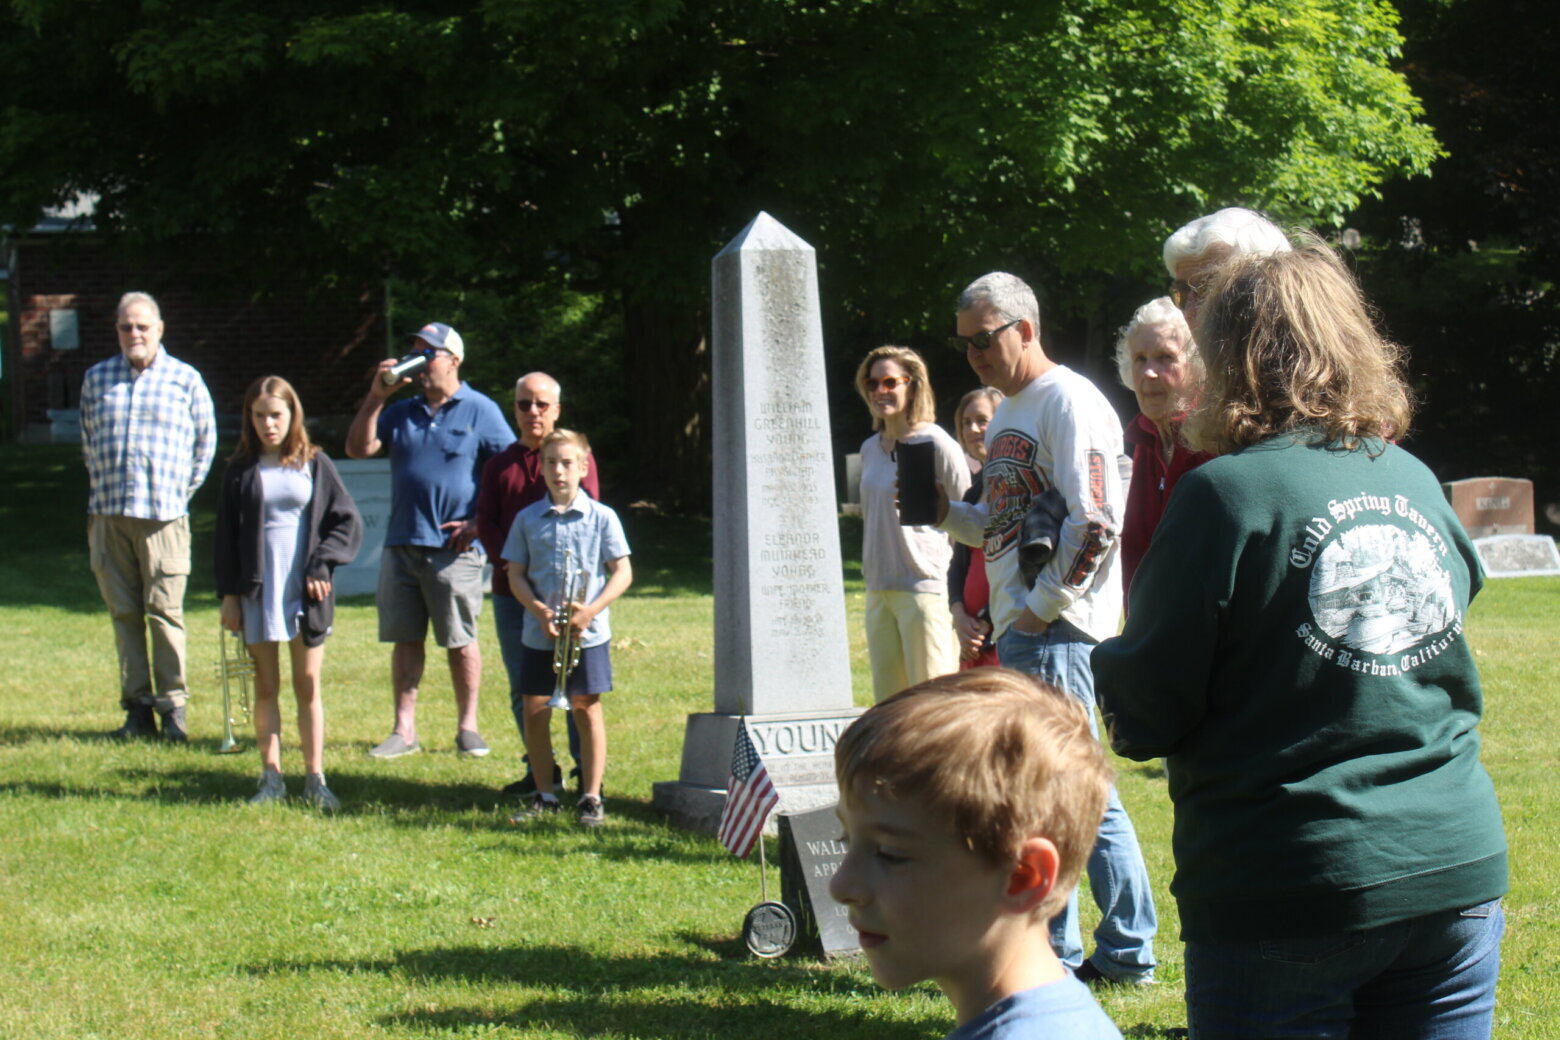 A group gathered on Memorial Day in Grandview Cemetery behind Charlotte Congregational Church to remember those who died in the military defending the United States. Combat veteran Jordan Paquette asked that, during the day’s holiday fun, everyone take time to remember the ultimate sacrifice so many have paid to preserve democracy.